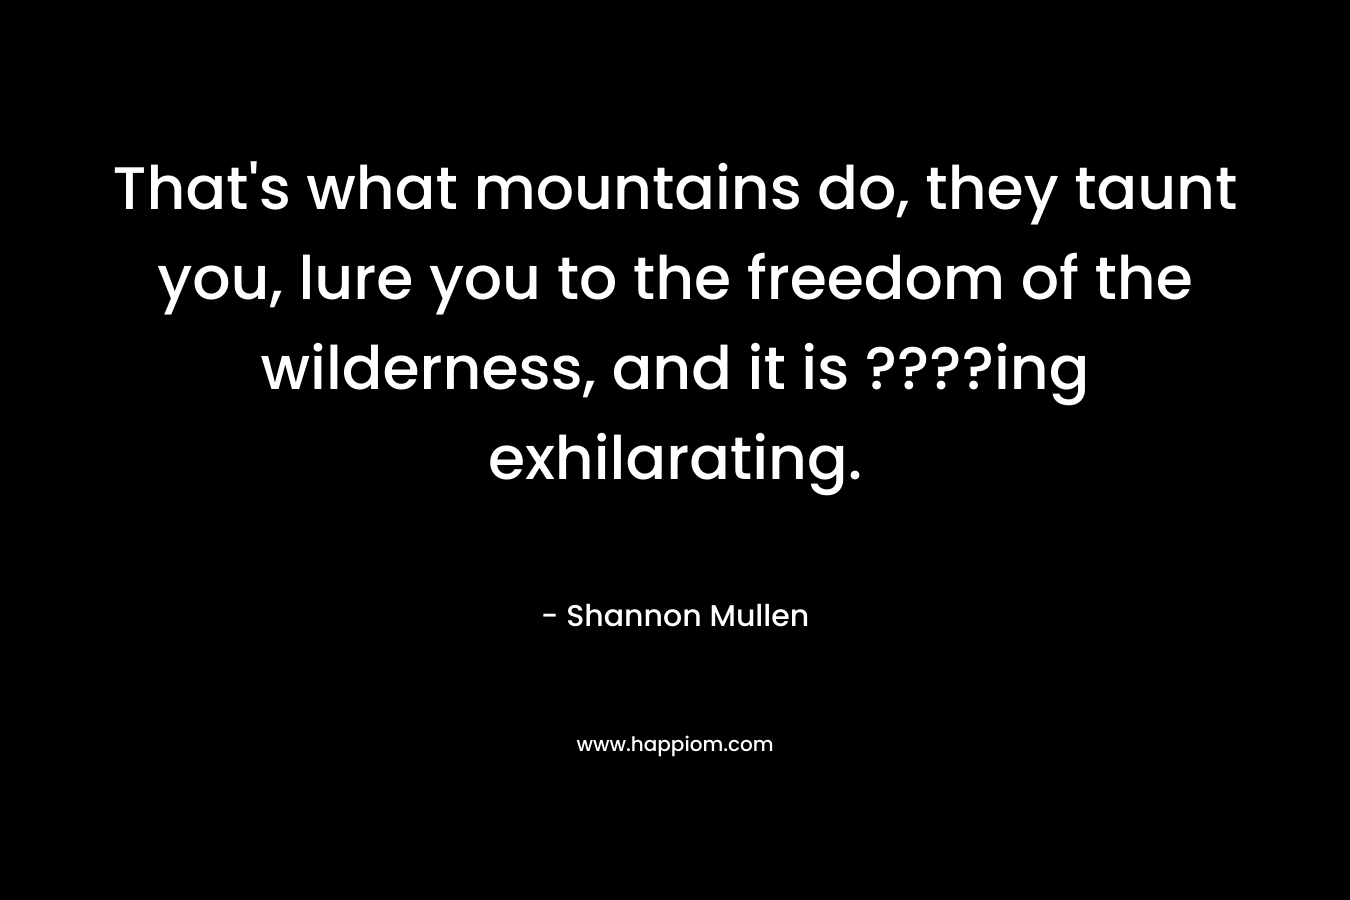 That's what mountains do, they taunt you, lure you to the freedom of the wilderness, and it is ????ing exhilarating.